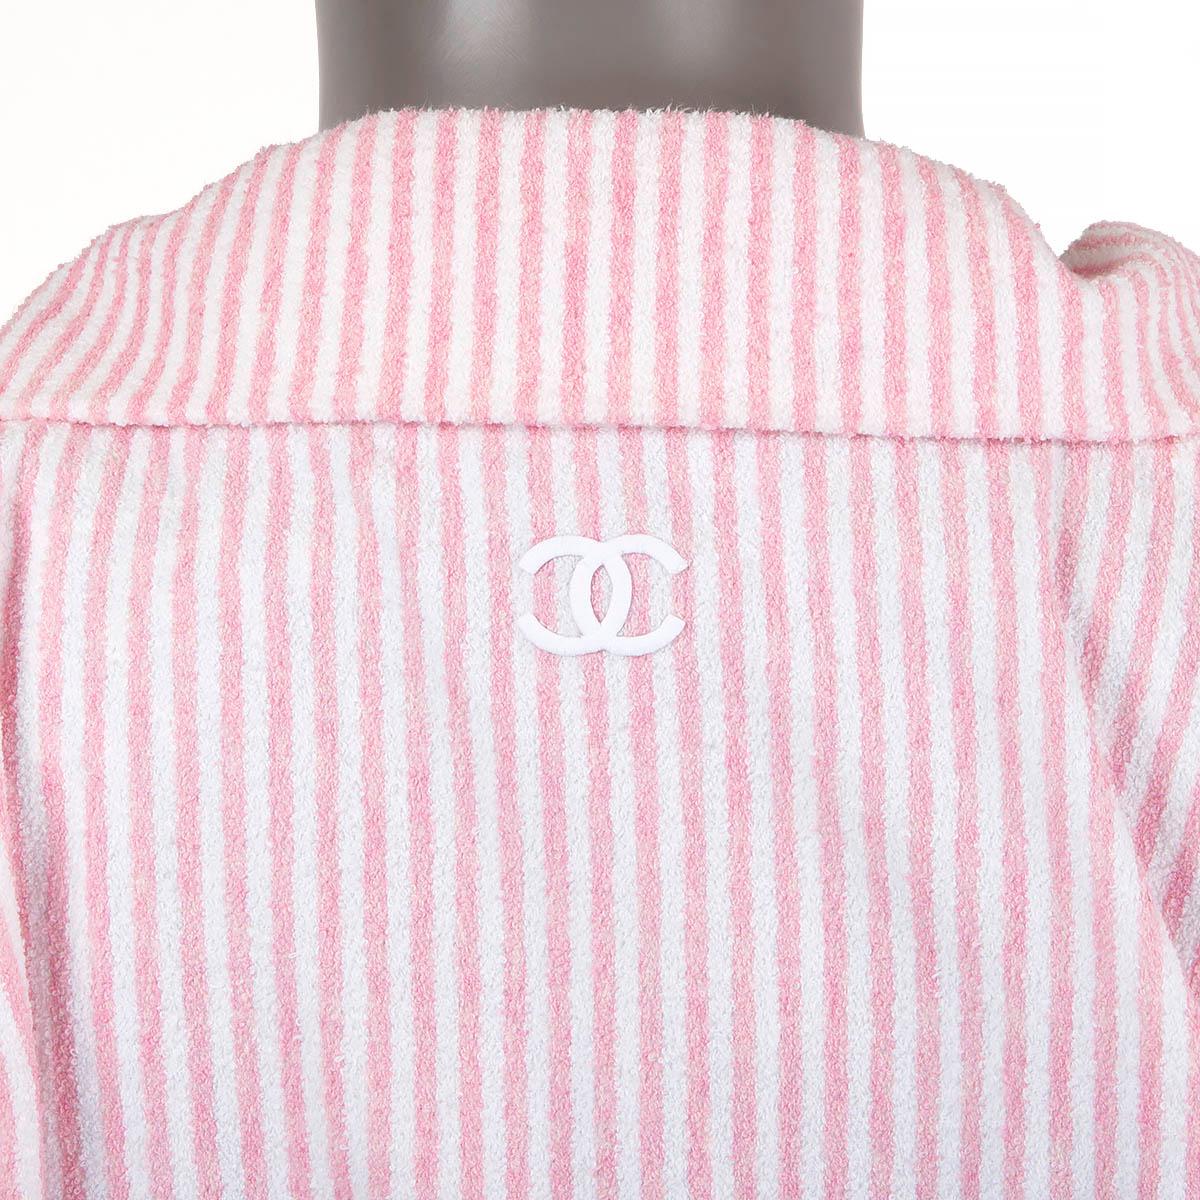 CHANEL pink & white 2019 19C LA PAUSA STRIPED TERRYCLOTH Jacket 40 M For Sale 3